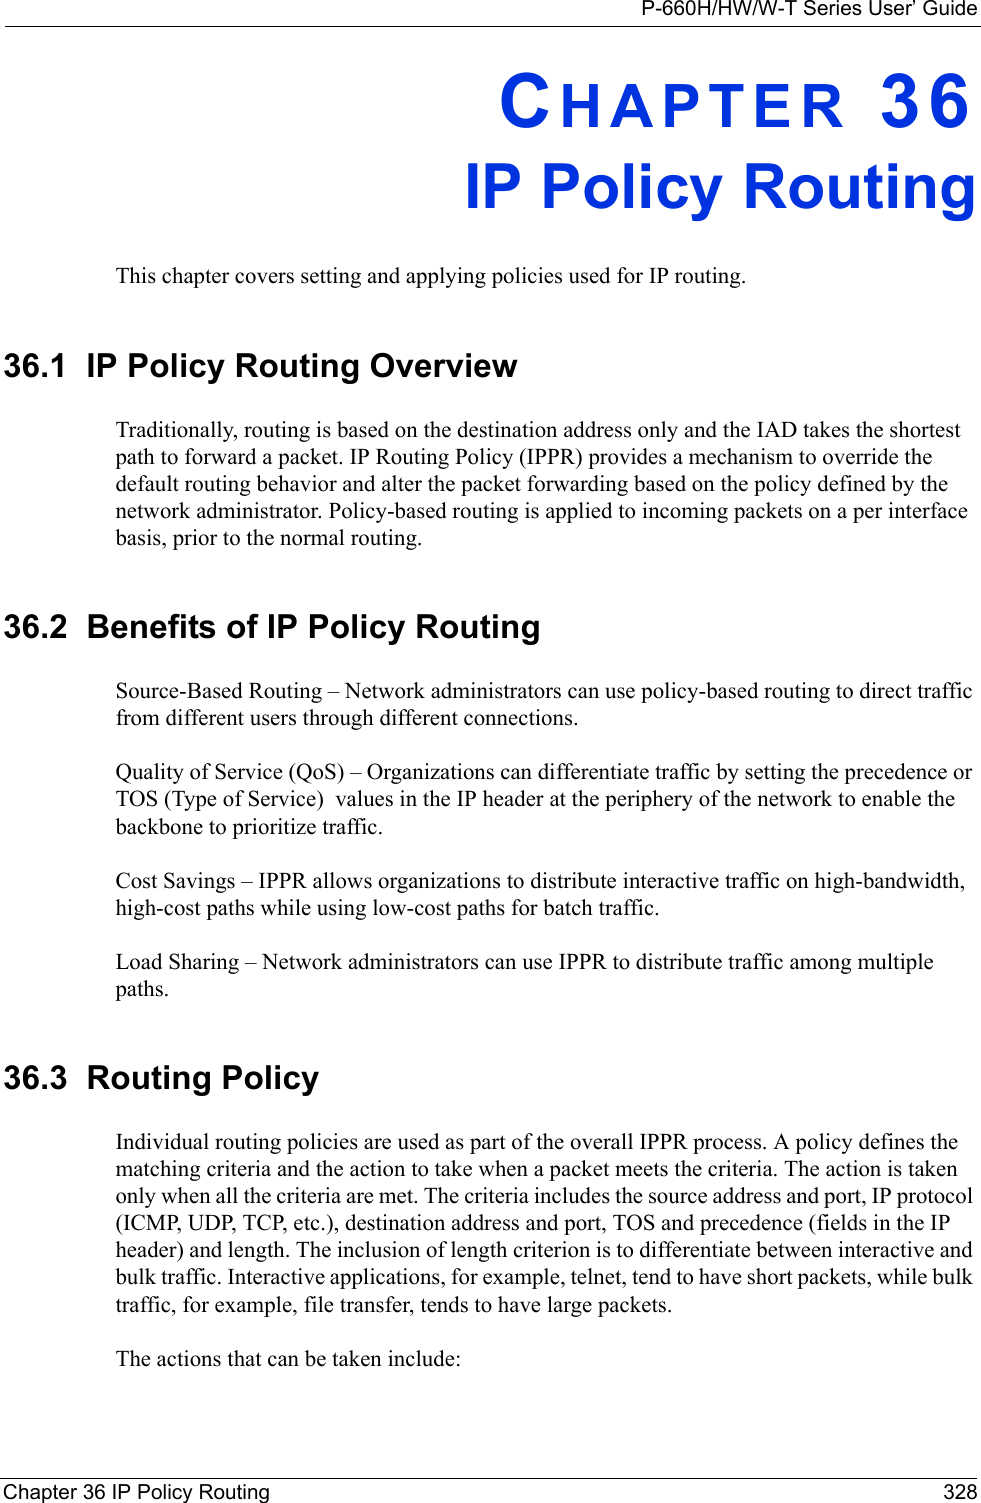 P-660H/HW/W-T Series User’ GuideChapter 36 IP Policy Routing 328CHAPTER 36IP Policy RoutingThis chapter covers setting and applying policies used for IP routing.36.1  IP Policy Routing OverviewTraditionally, routing is based on the destination address only and the IAD takes the shortest path to forward a packet. IP Routing Policy (IPPR) provides a mechanism to override the default routing behavior and alter the packet forwarding based on the policy defined by the network administrator. Policy-based routing is applied to incoming packets on a per interface basis, prior to the normal routing.36.2  Benefits of IP Policy RoutingSource-Based Routing – Network administrators can use policy-based routing to direct traffic from different users through different connections.Quality of Service (QoS) – Organizations can differentiate traffic by setting the precedence or TOS (Type of Service)  values in the IP header at the periphery of the network to enable the backbone to prioritize traffic.Cost Savings – IPPR allows organizations to distribute interactive traffic on high-bandwidth, high-cost paths while using low-cost paths for batch traffic.Load Sharing – Network administrators can use IPPR to distribute traffic among multiple paths.36.3  Routing PolicyIndividual routing policies are used as part of the overall IPPR process. A policy defines the matching criteria and the action to take when a packet meets the criteria. The action is taken only when all the criteria are met. The criteria includes the source address and port, IP protocol (ICMP, UDP, TCP, etc.), destination address and port, TOS and precedence (fields in the IP header) and length. The inclusion of length criterion is to differentiate between interactive and bulk traffic. Interactive applications, for example, telnet, tend to have short packets, while bulk traffic, for example, file transfer, tends to have large packets.The actions that can be taken include: